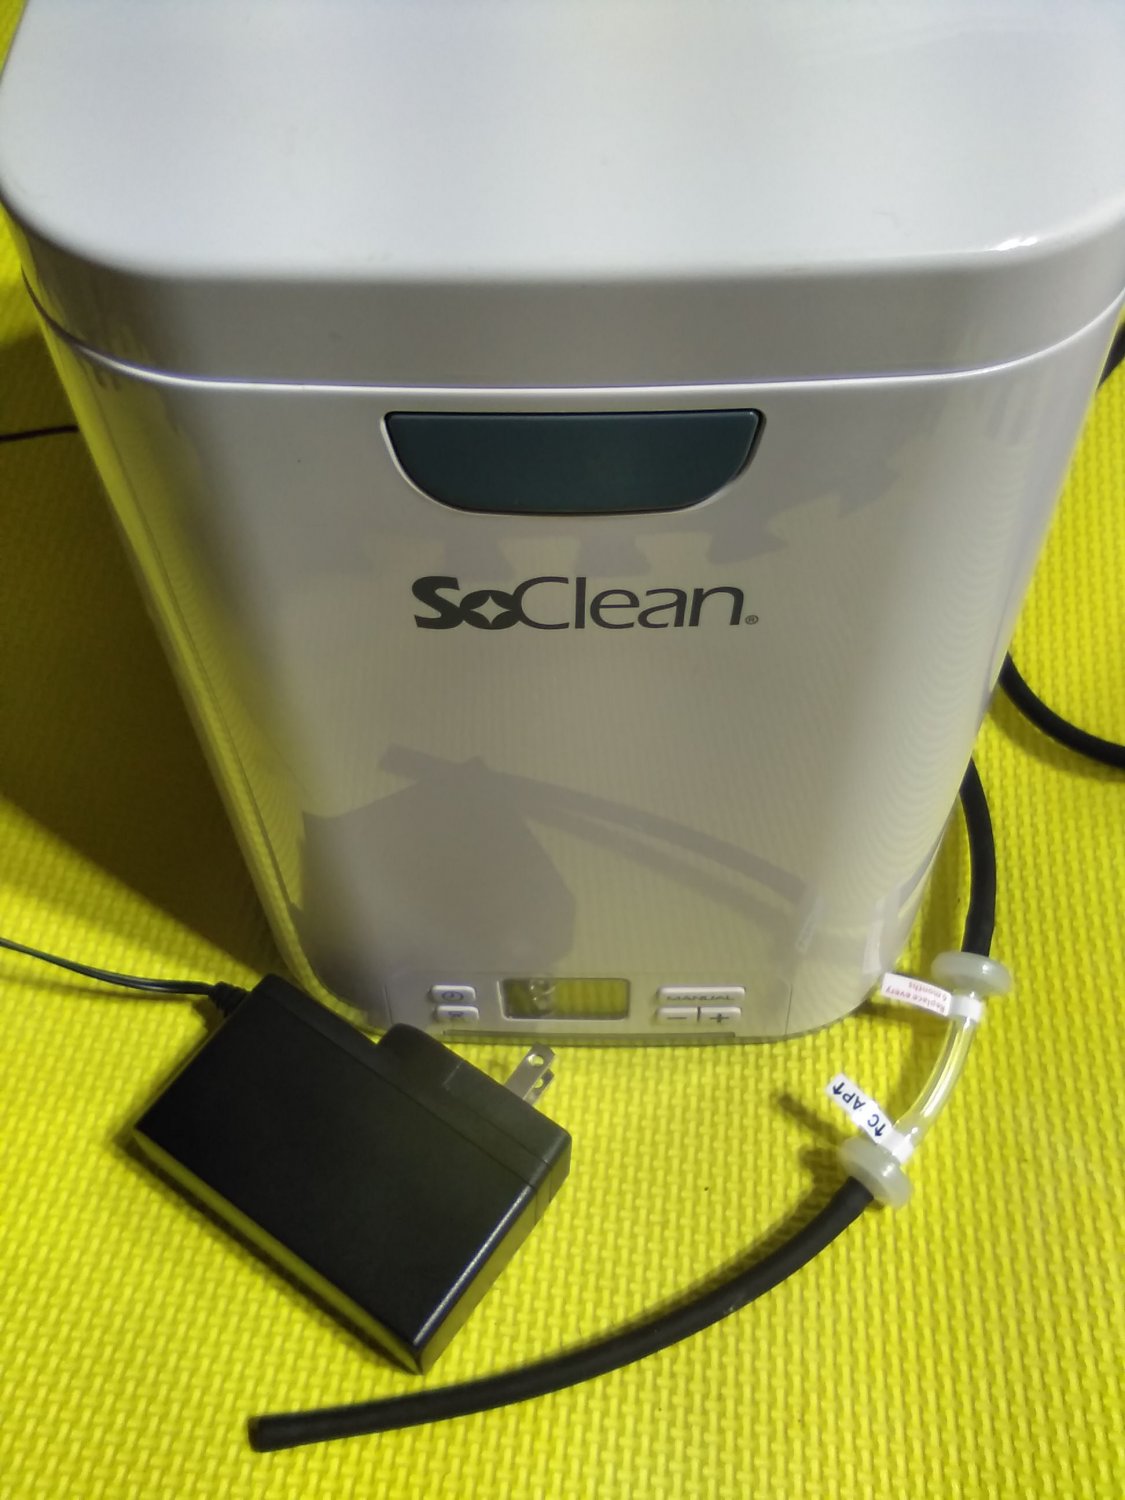 SoClean 2 CPAP Cleaner and Sanitizer Machine - SC1200